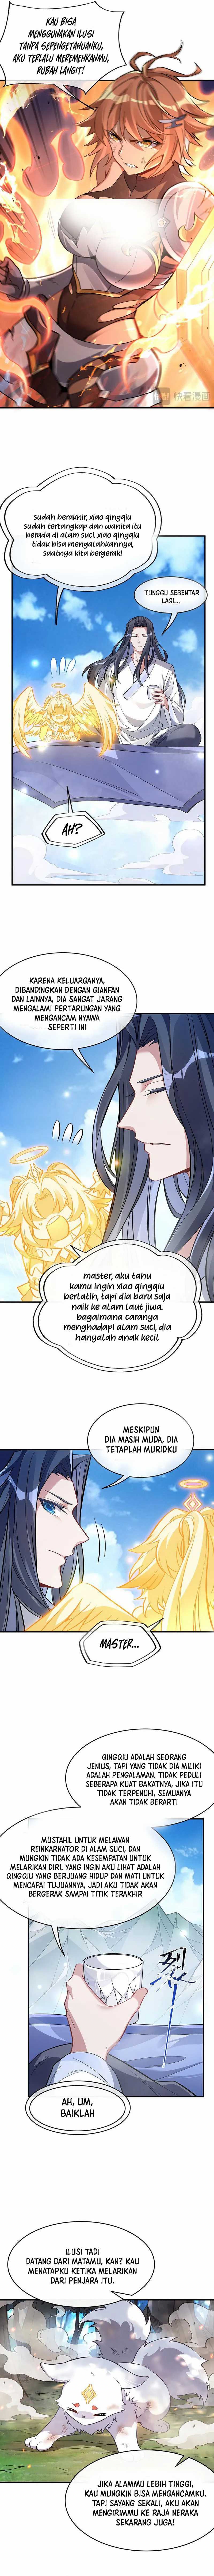 Dilarang COPAS - situs resmi www.mangacanblog.com - Komik my female apprentices are all big shots from the future 217 - chapter 217 218 Indonesia my female apprentices are all big shots from the future 217 - chapter 217 Terbaru 6|Baca Manga Komik Indonesia|Mangacan